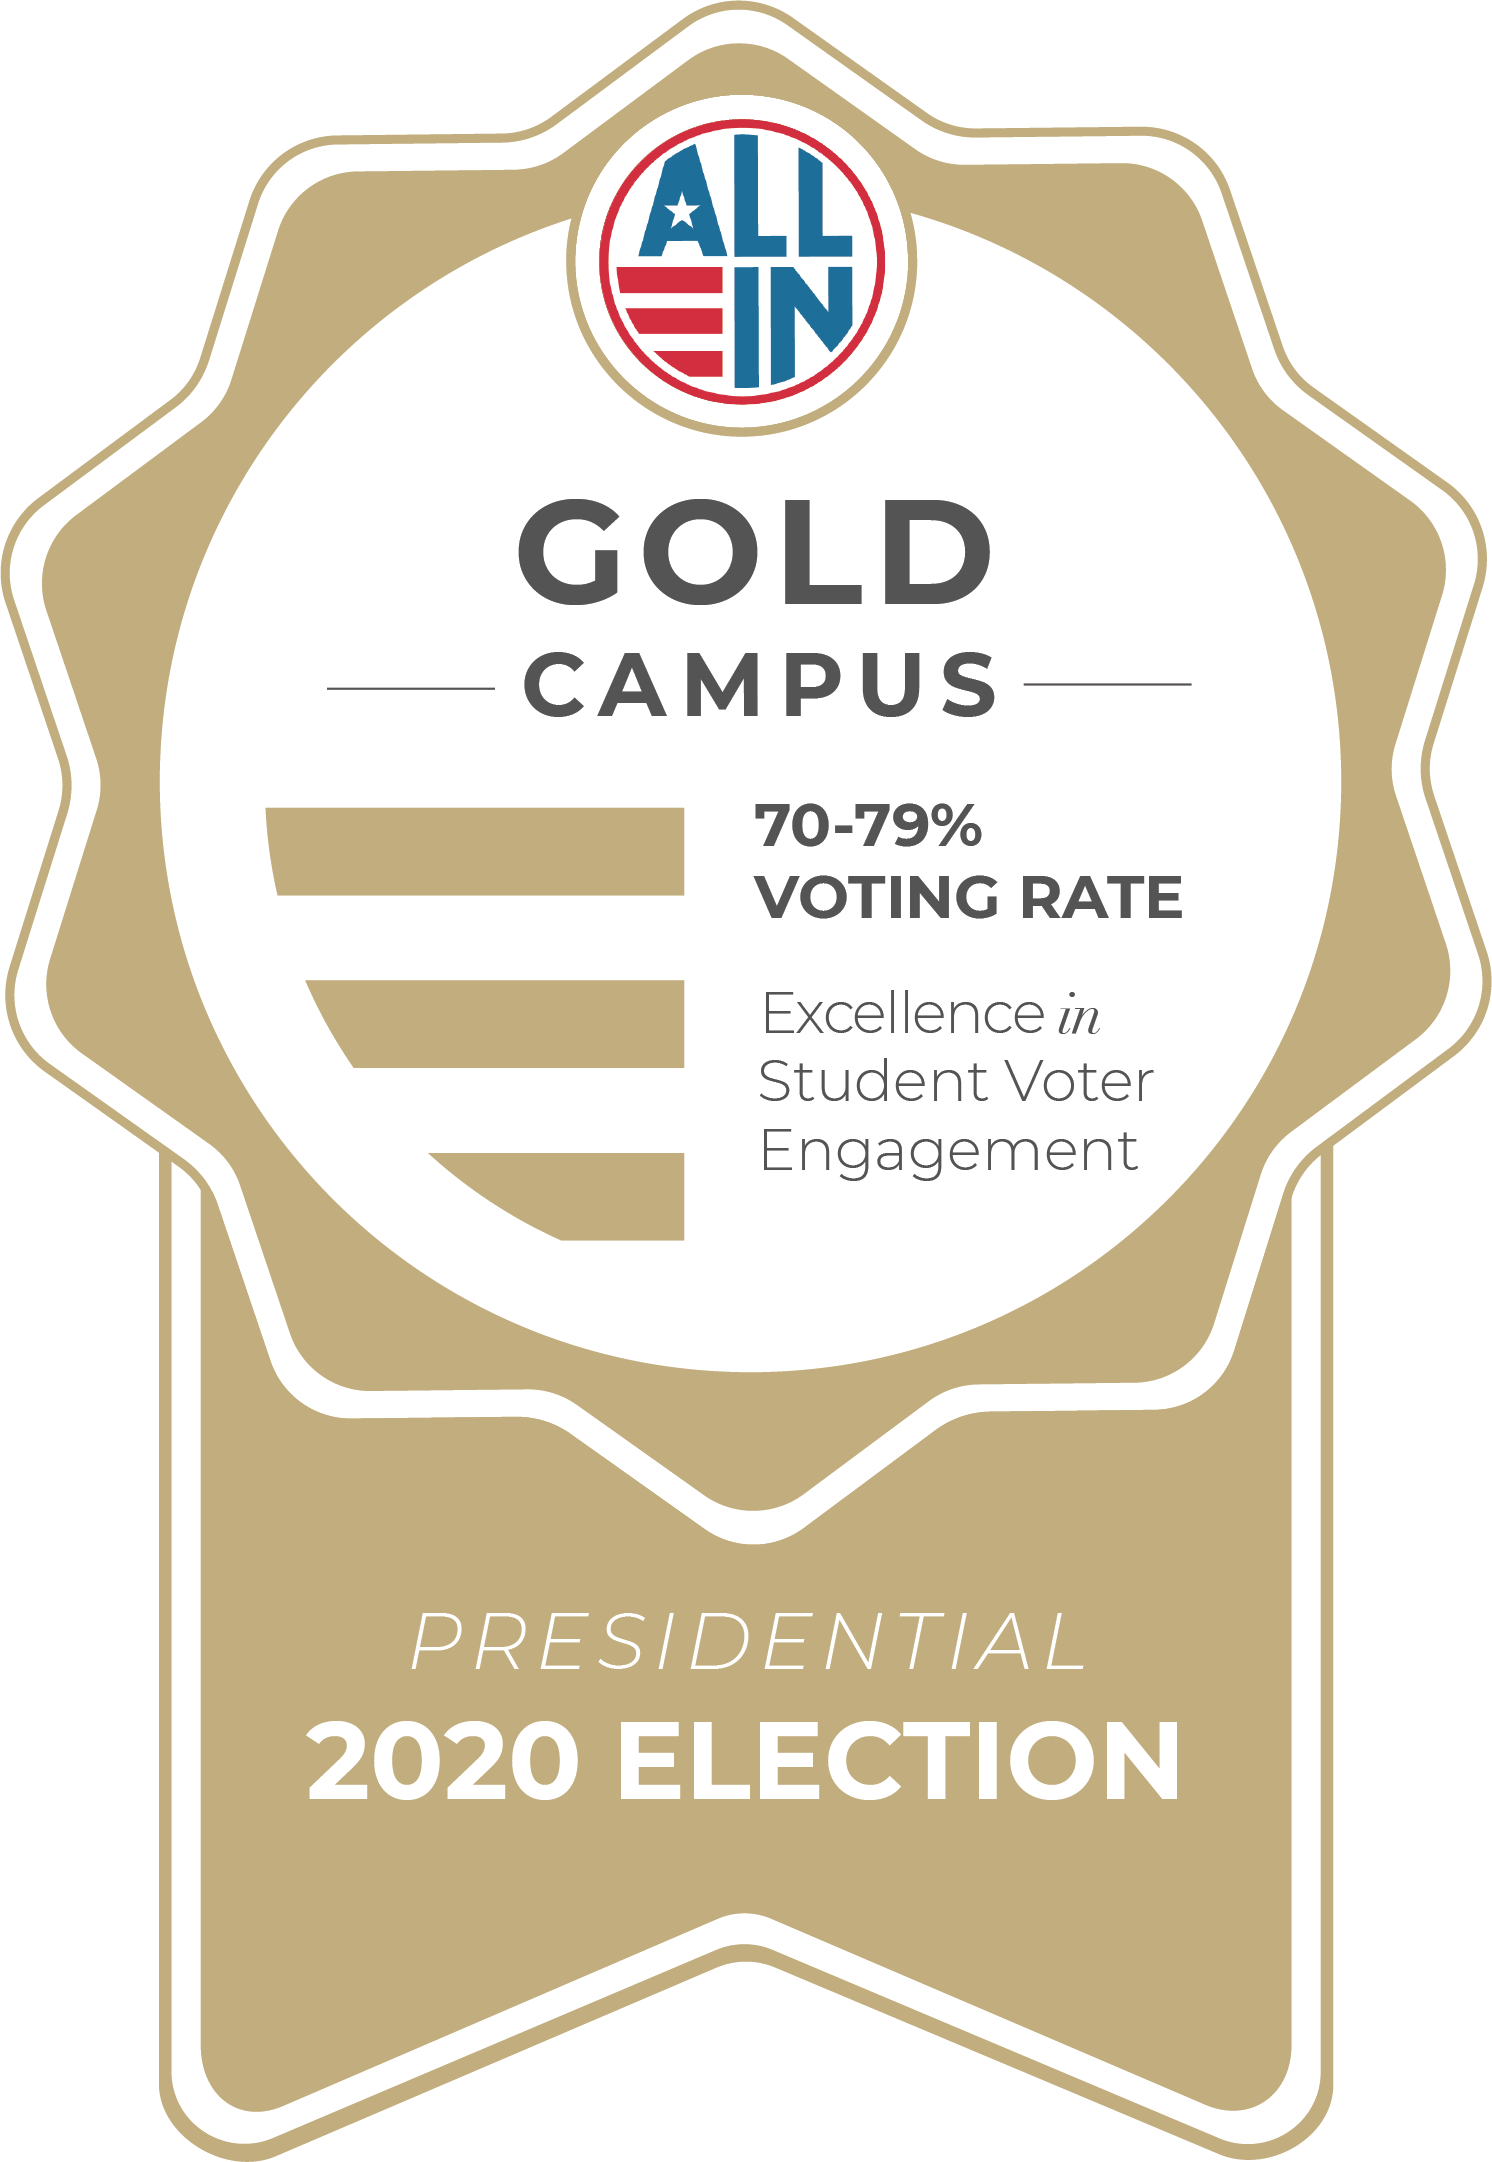 Gold Seal Award showing 70 - 79% voter participation